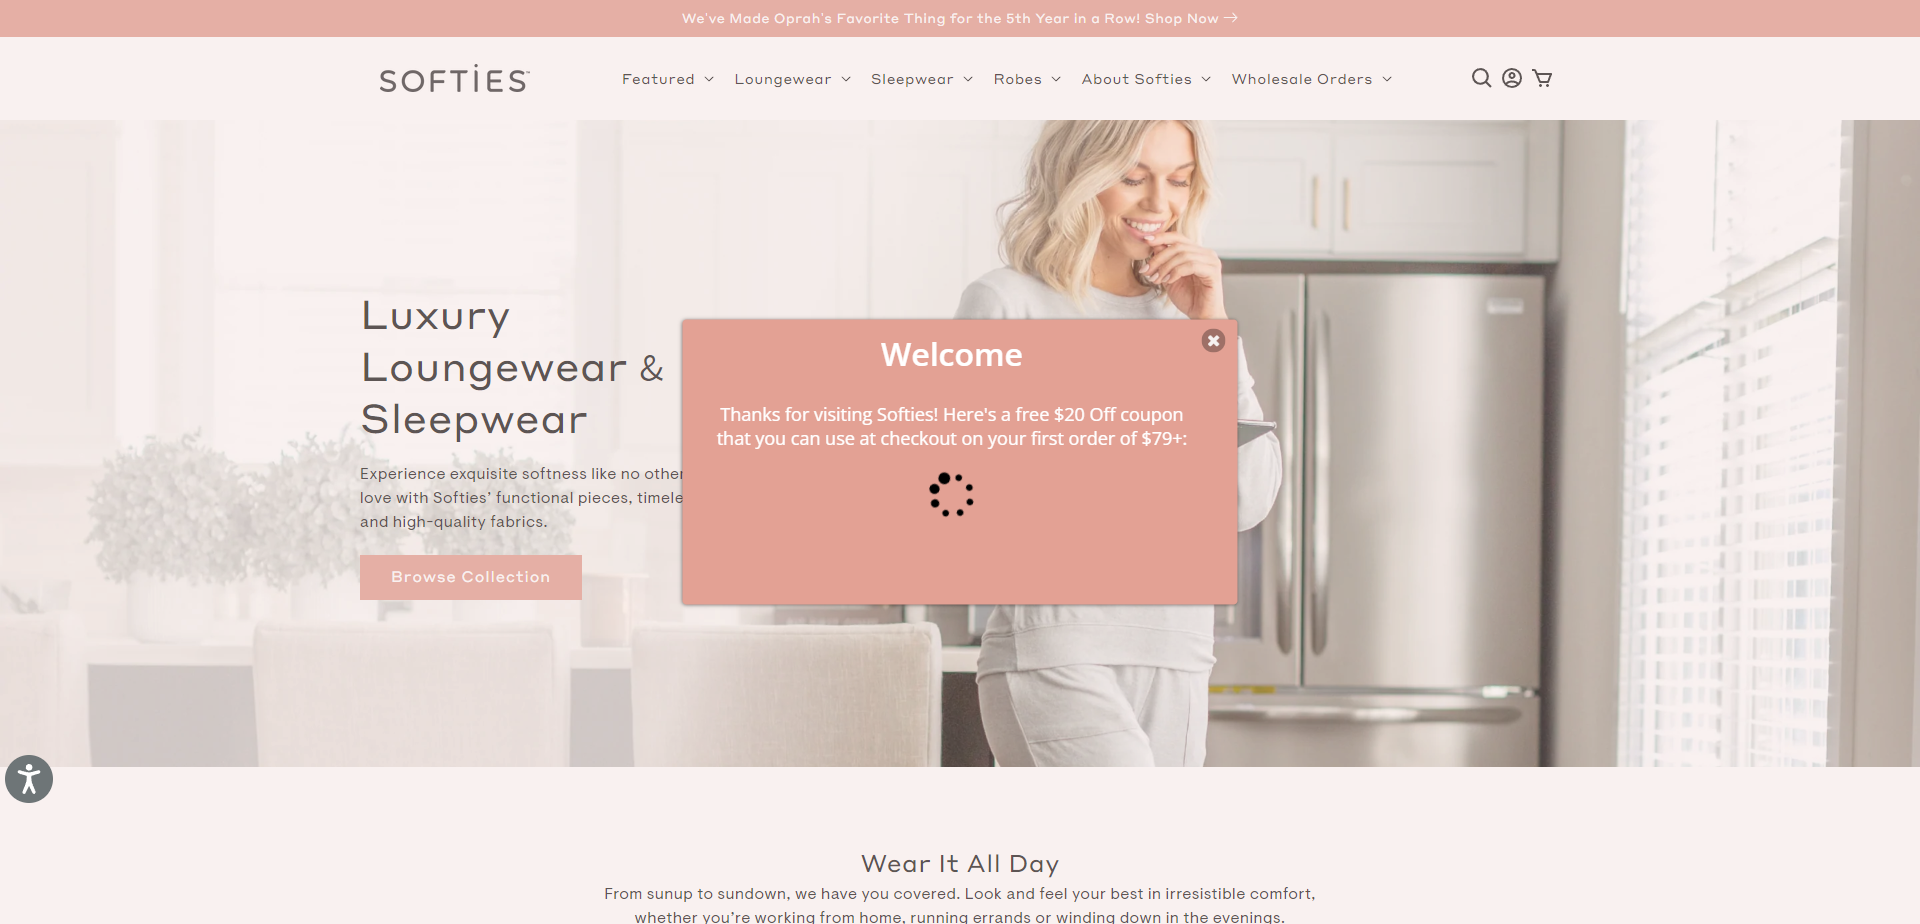 Landing Page for Softies